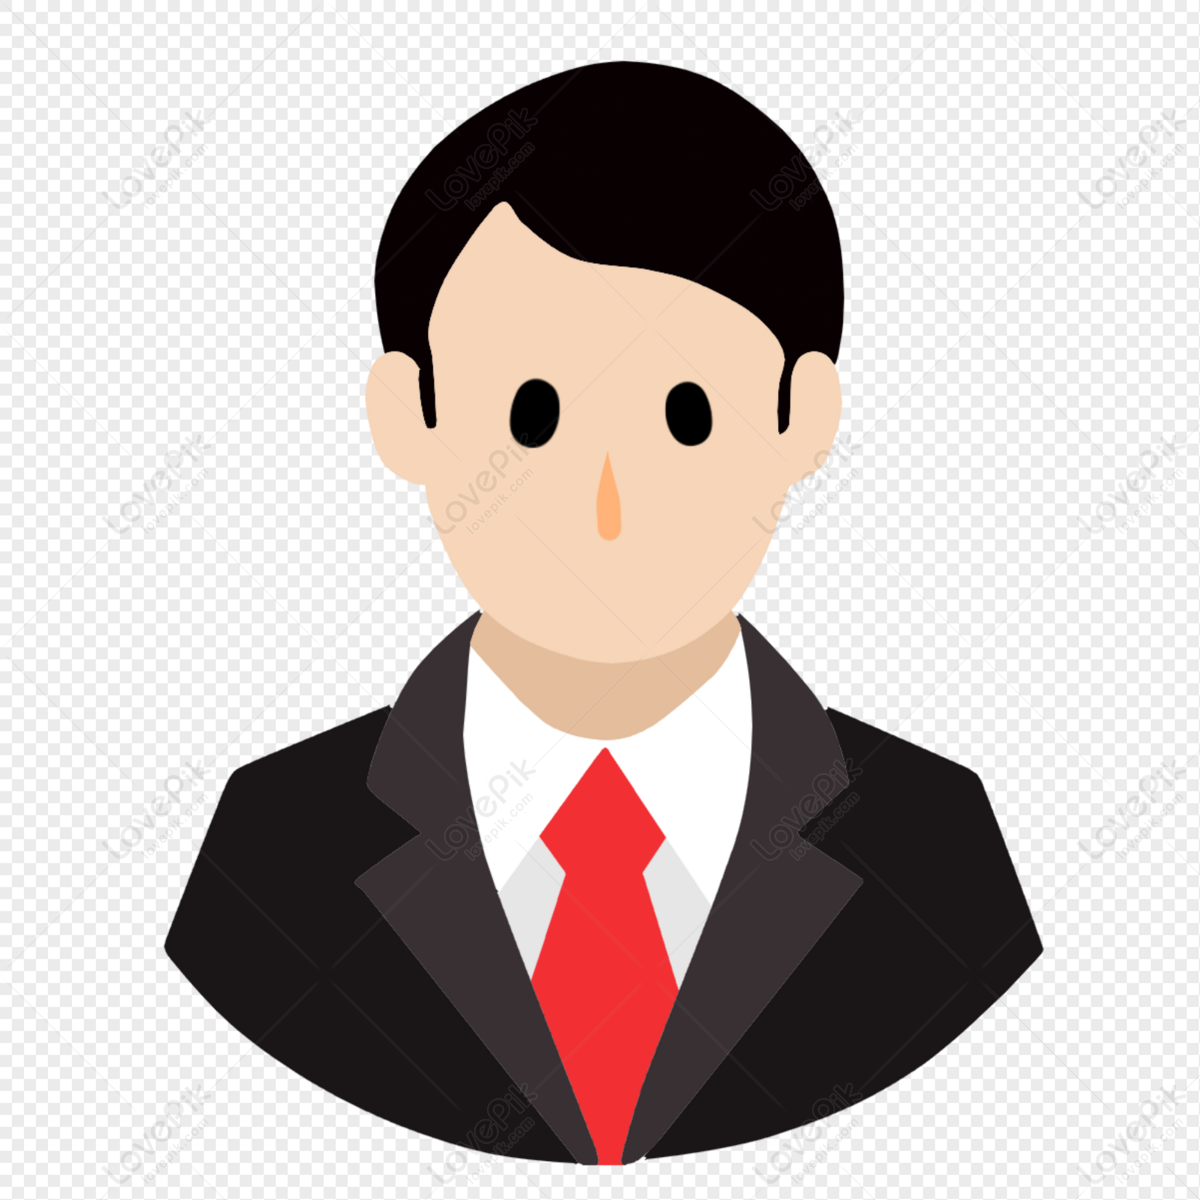 Cartoon Customer Service Avatar PNG Hd Transparent Image And Clipart Image  For Free Download - Lovepik | 401451024